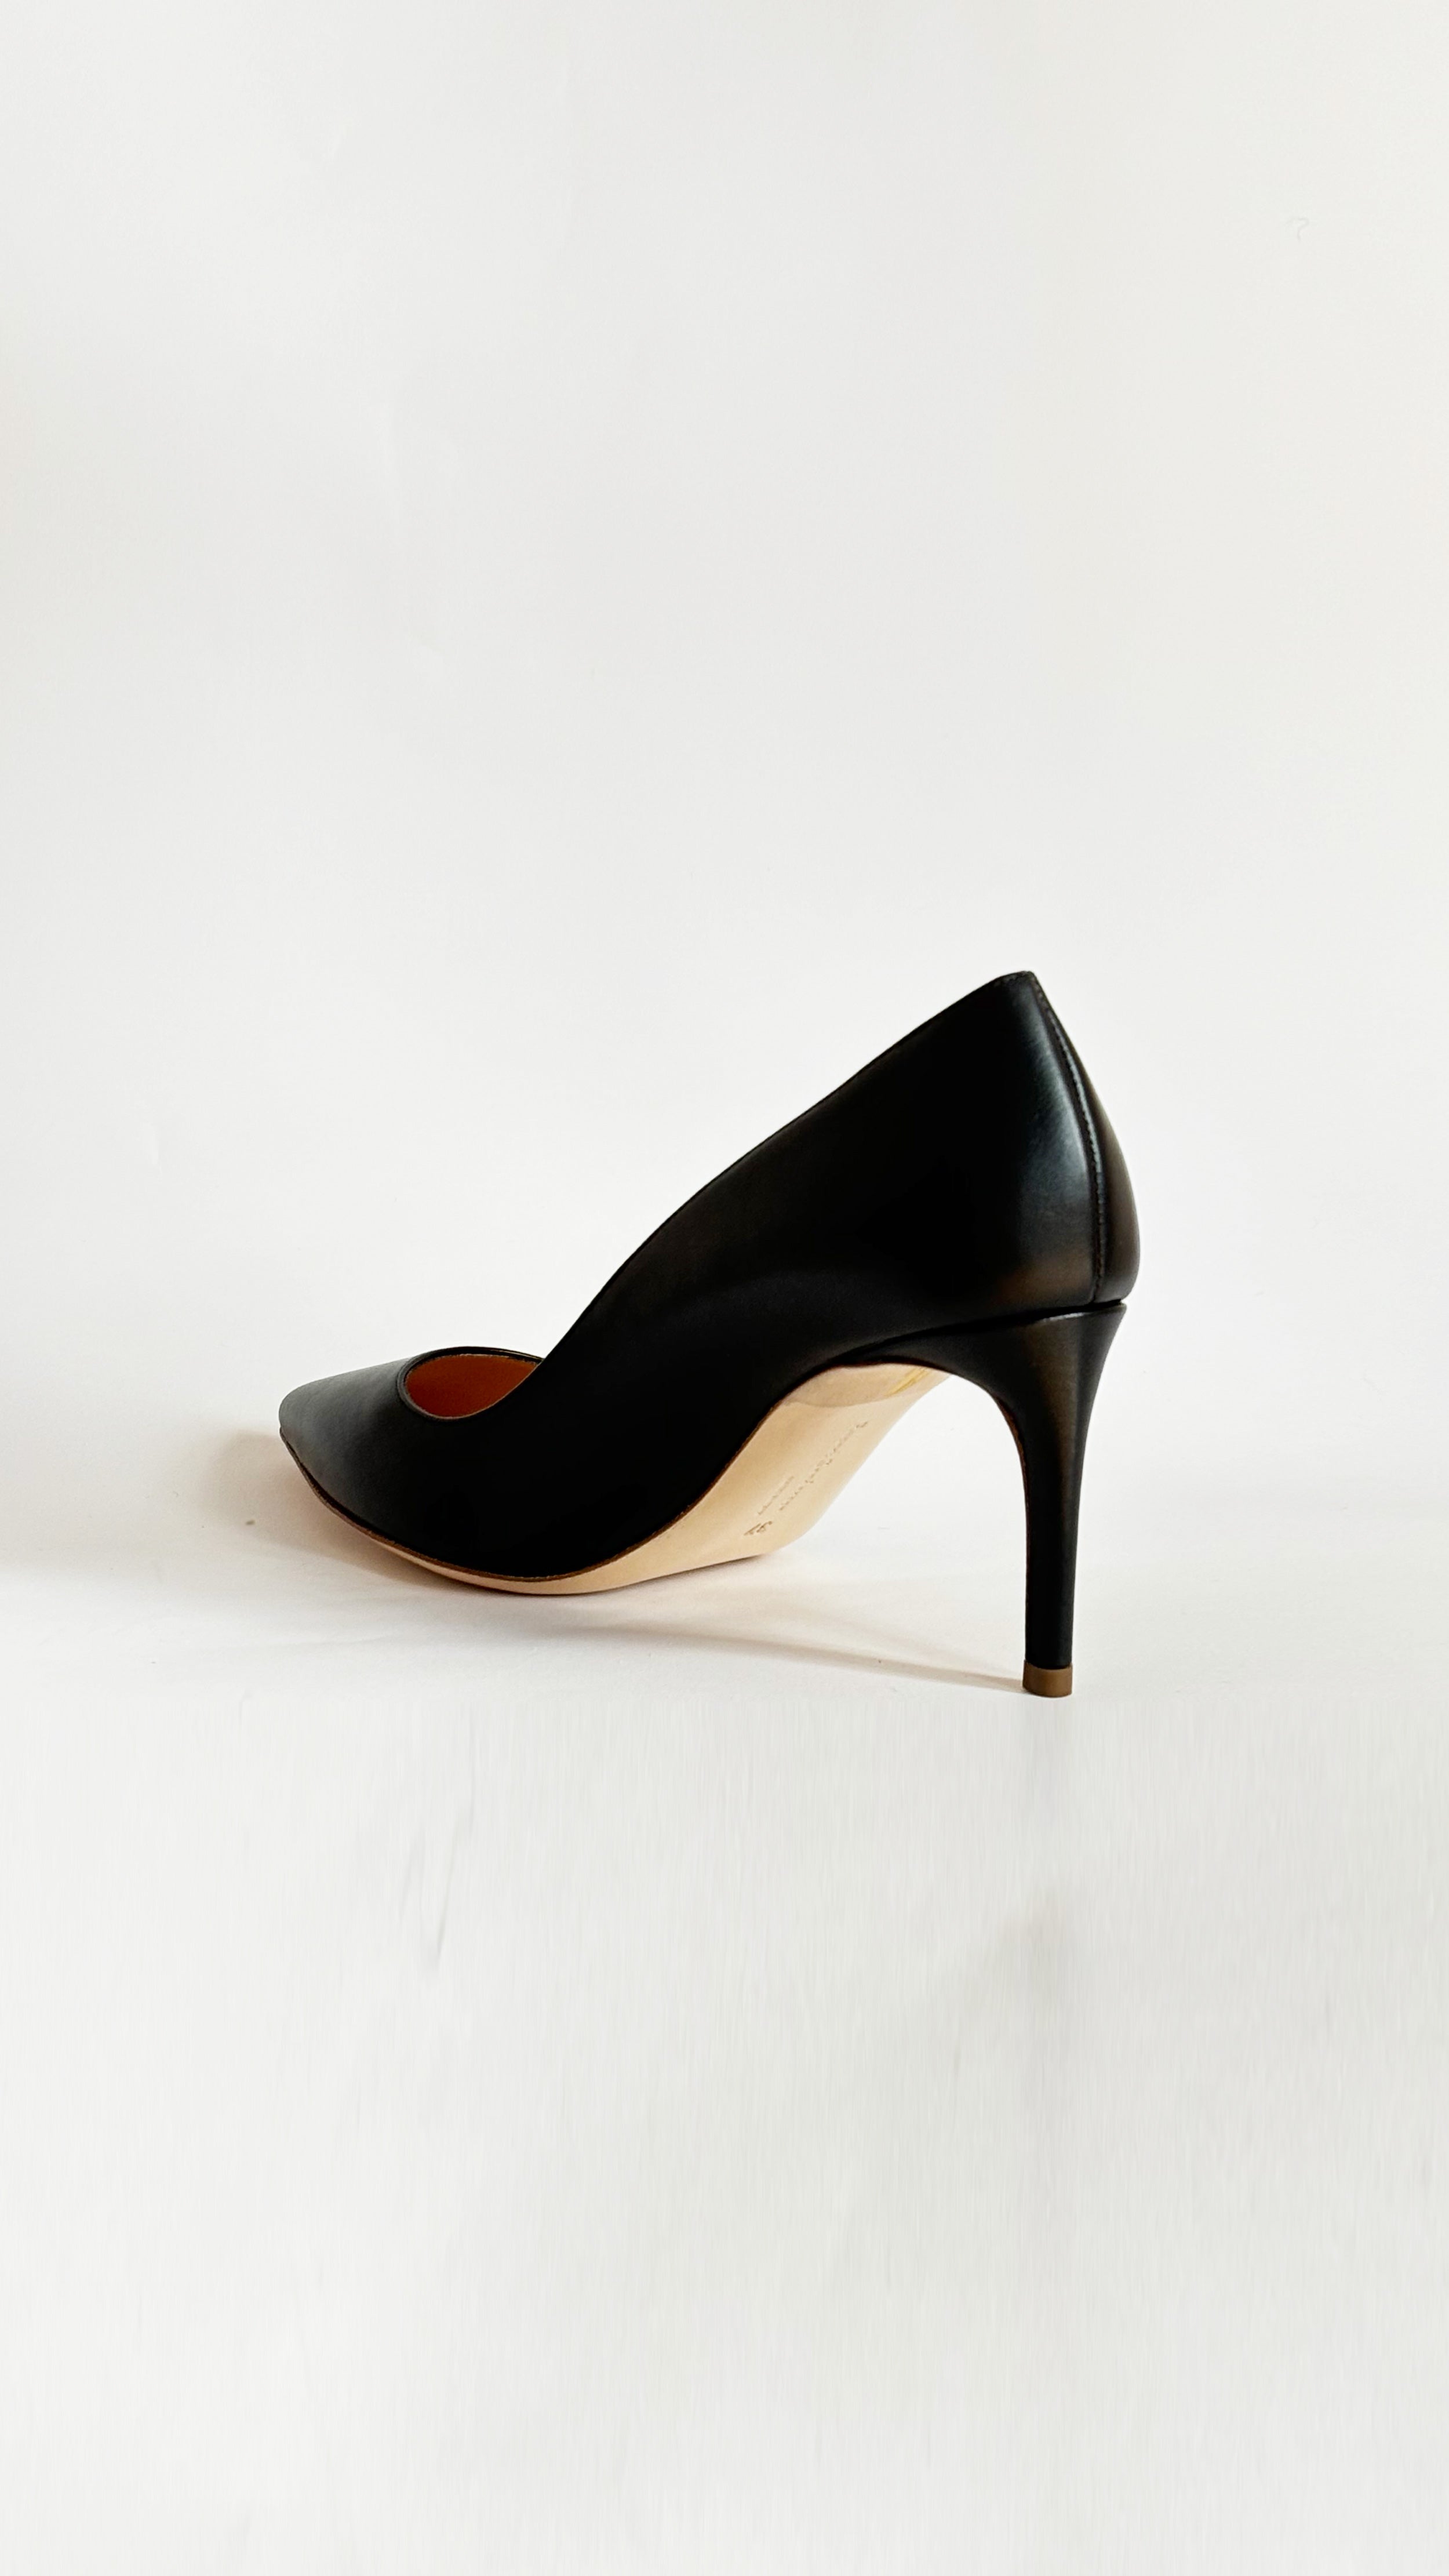 Rupert Sanderson New Nada in Black Heel, a timeless classic crafted in soft black leather. Its elegant silhouette is complemented by a slim 75mm stiletto heel. Handmade in Italy. Shown from the back.